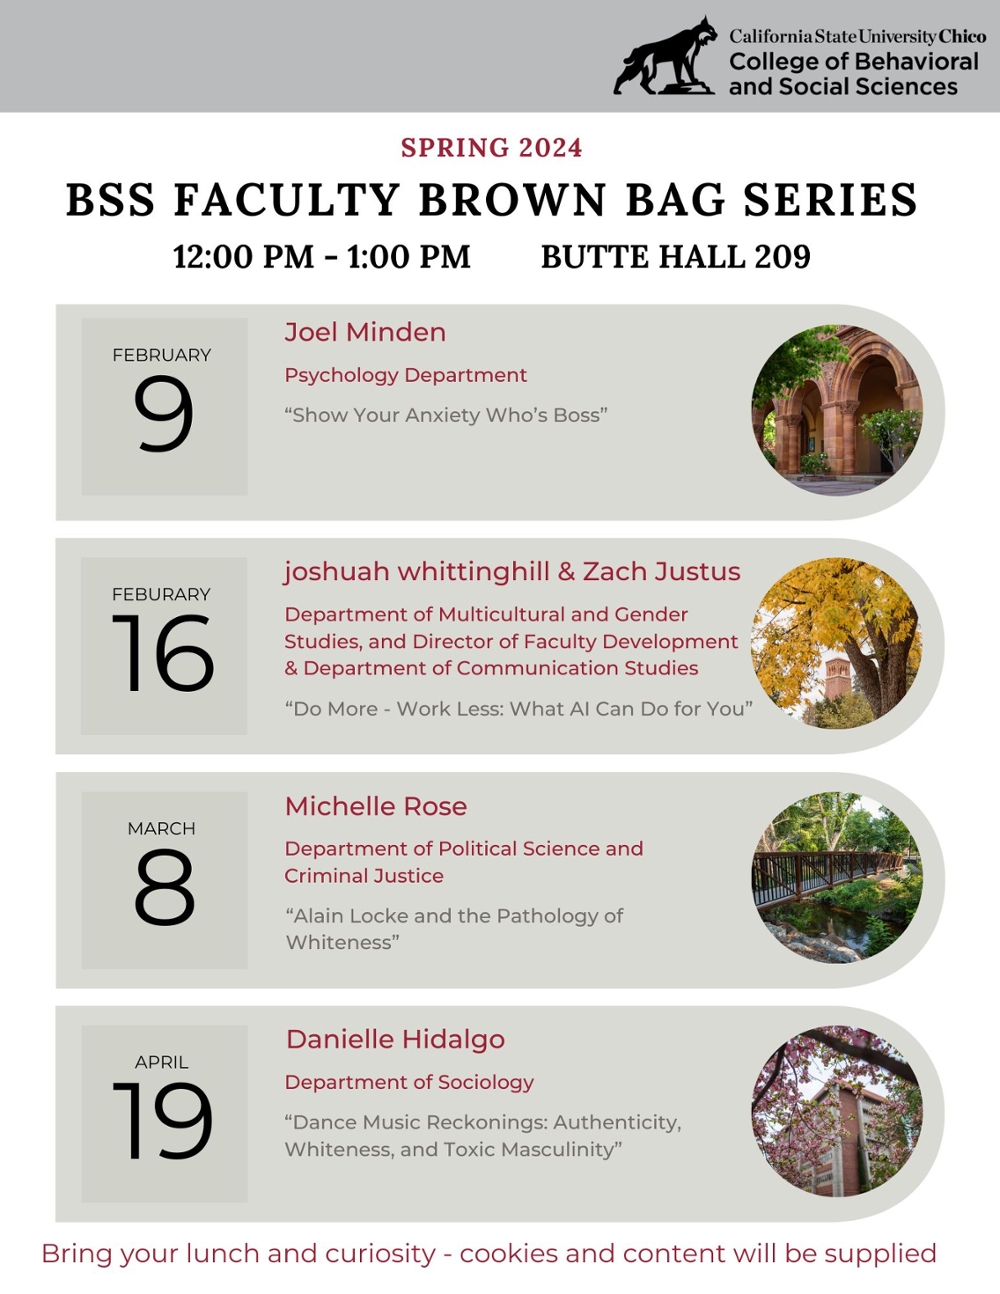 Informational flier with Faculty presentation schedule for spring 2024